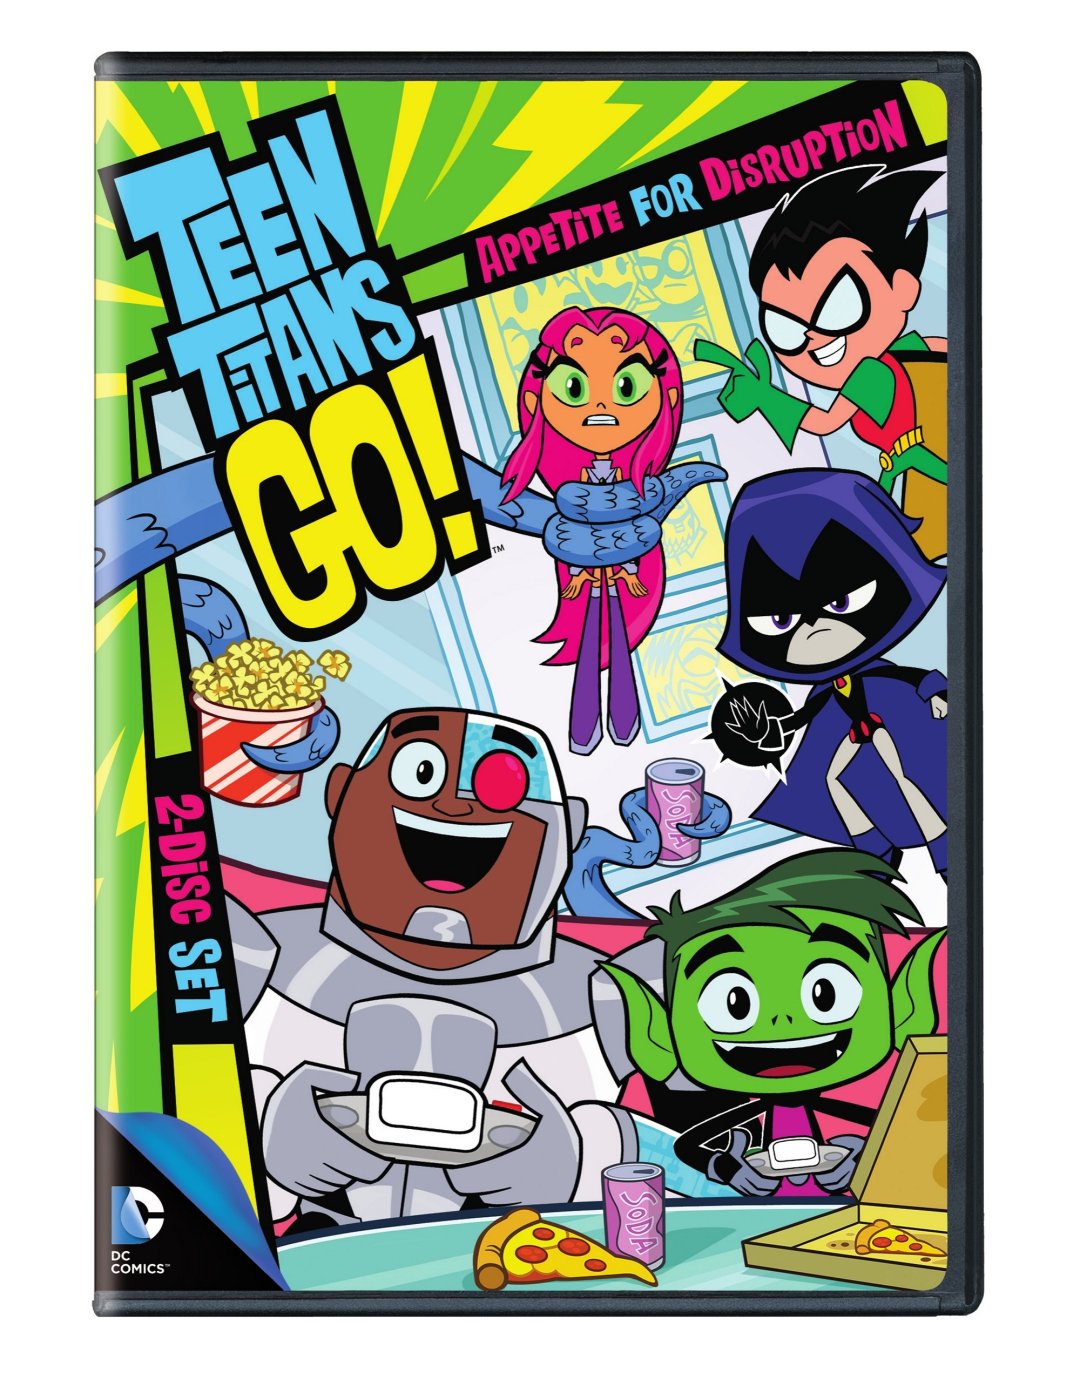 🔥 Download Teen Titans Go HD Wallpaper Image Gallery by @kristinaa ...